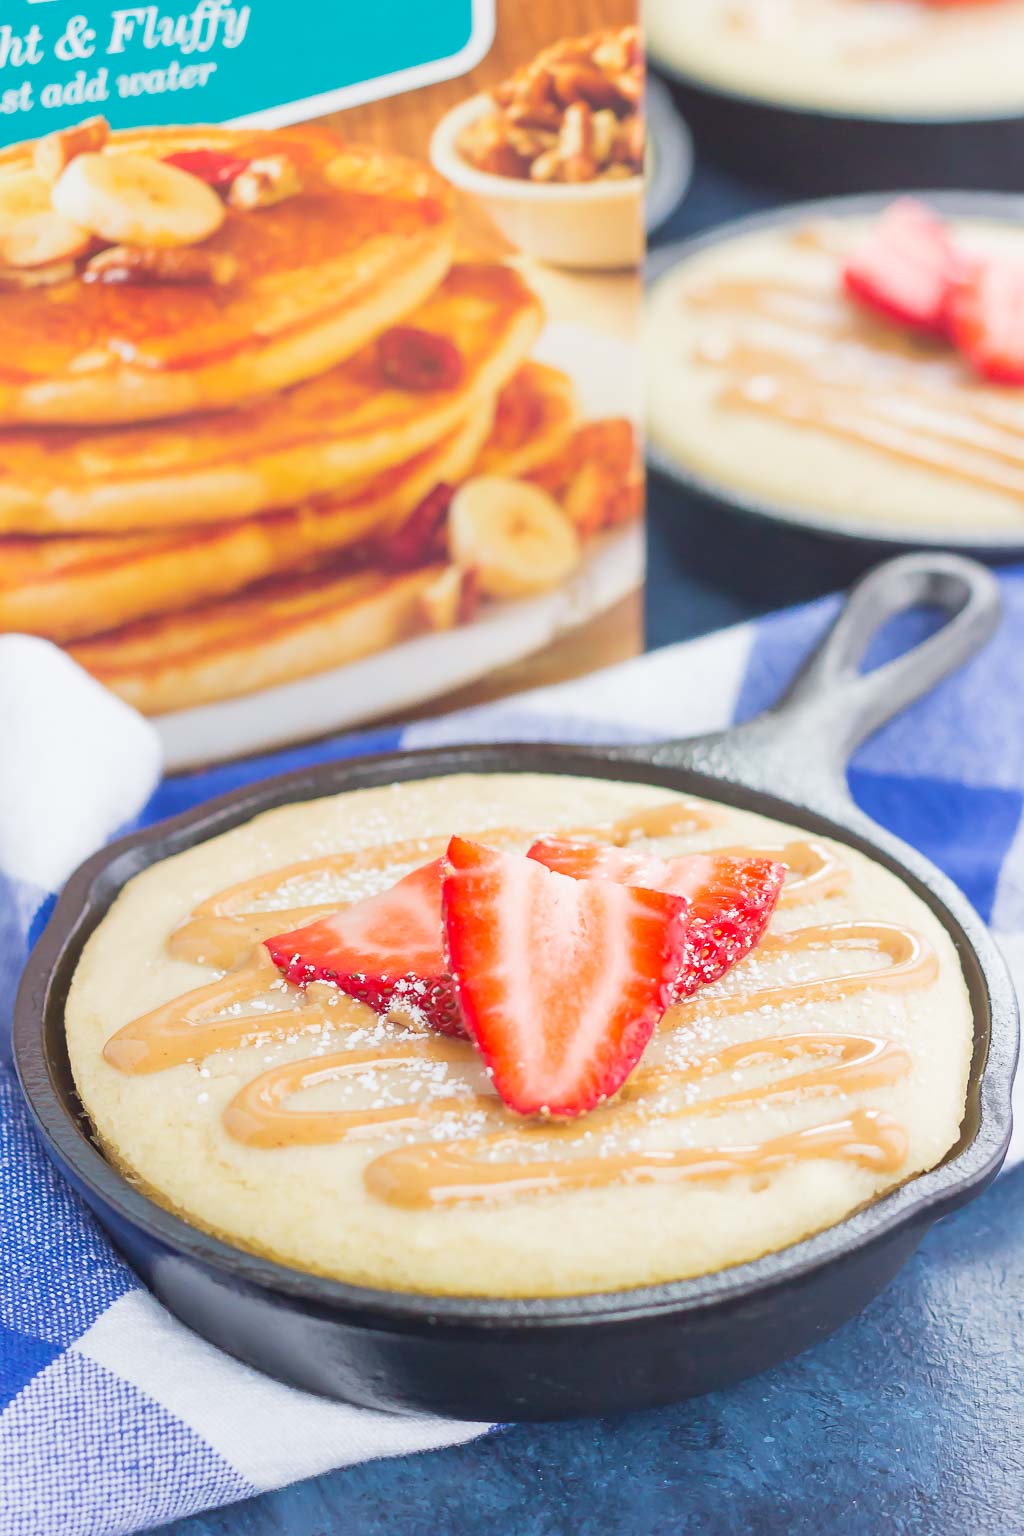 Peanut Butter and Jelly Baked Pancakes are a warm and cozy breakfast to get you going in the mornings. Drizzled with a sweet peanut butter syrup and topped with fresh strawberries, this easy breakfast is ready in less than 30 minutes and perfect for the whole family! #pancakes #bakedpancakes #peanutbutter #peanutbutterpancakes #peanutbuttersyrup #pbjpancakes #breakfast #easybreakfast